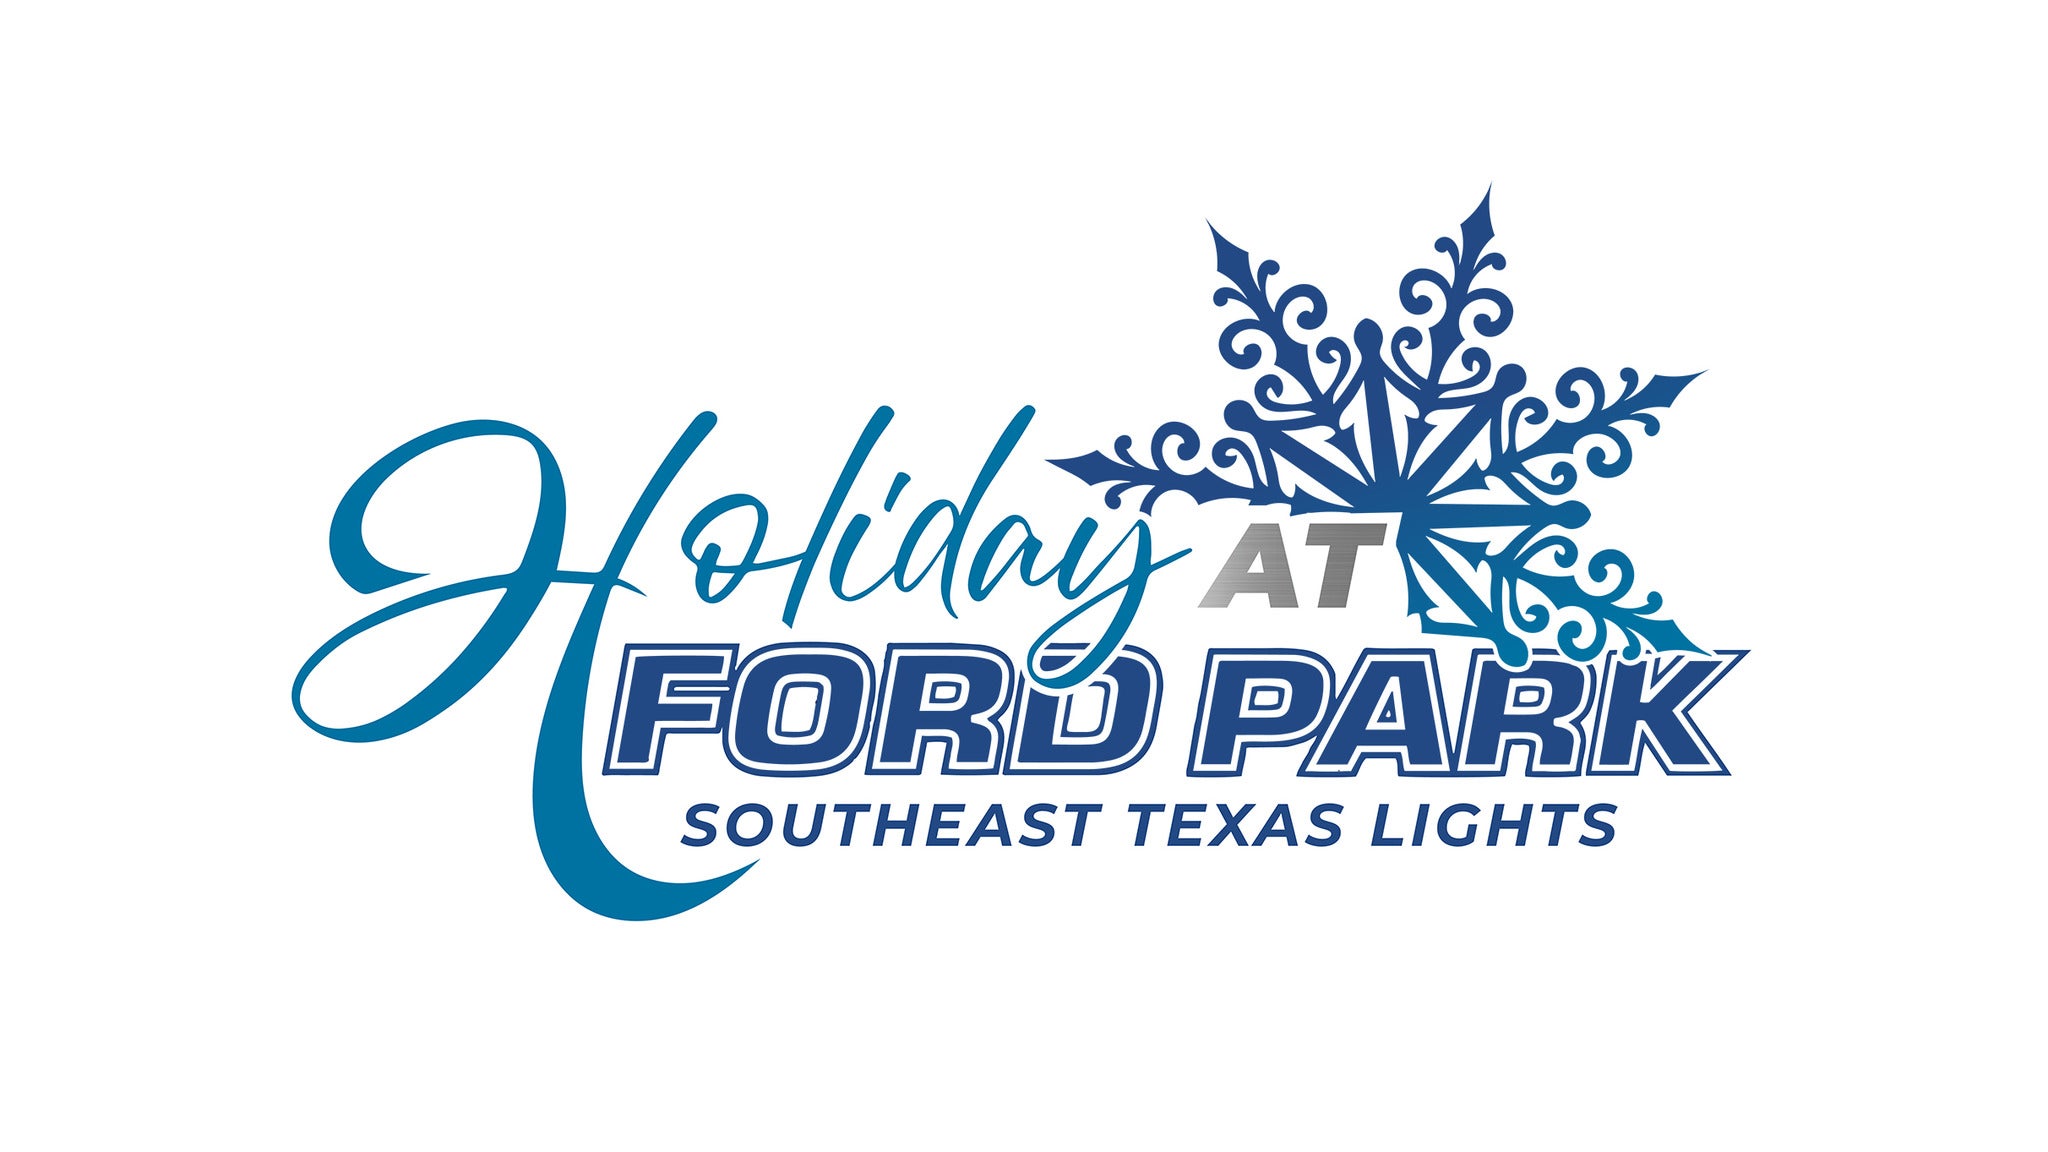 Holiday at Ford Park - Southeast Texas Lights in Beaumont promo photo for $15 Ticket presale offer code